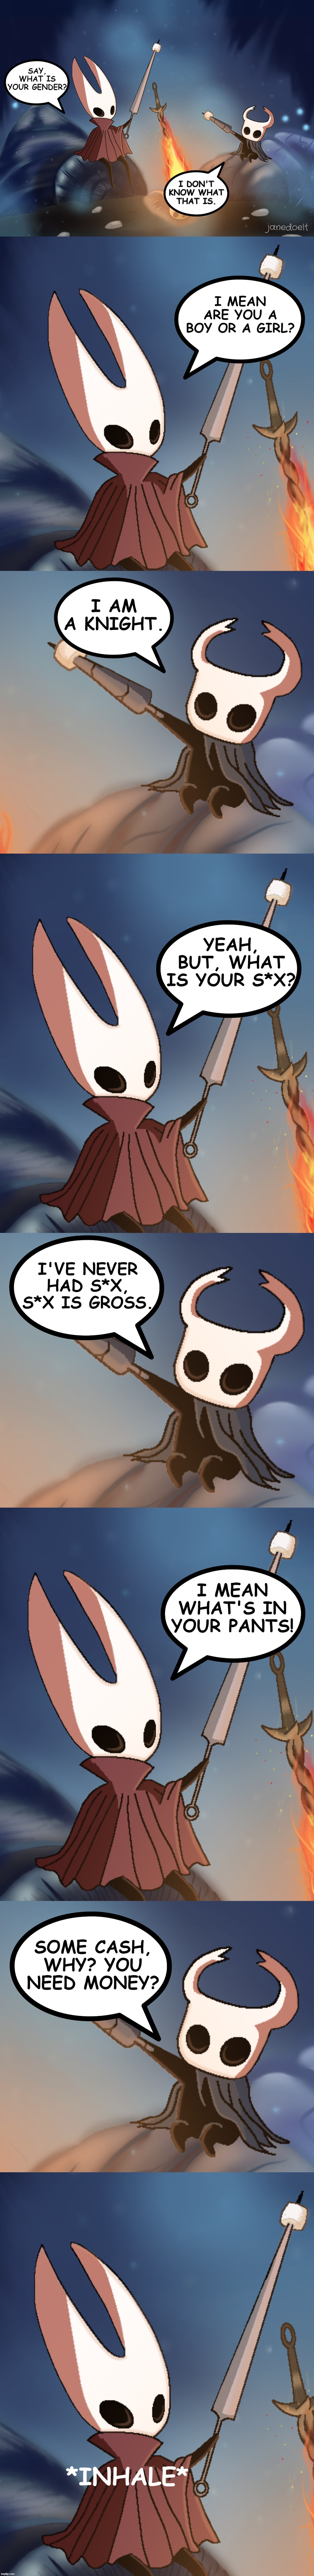 xD | image tagged in hollow knight,the knight,hornet | made w/ Imgflip meme maker